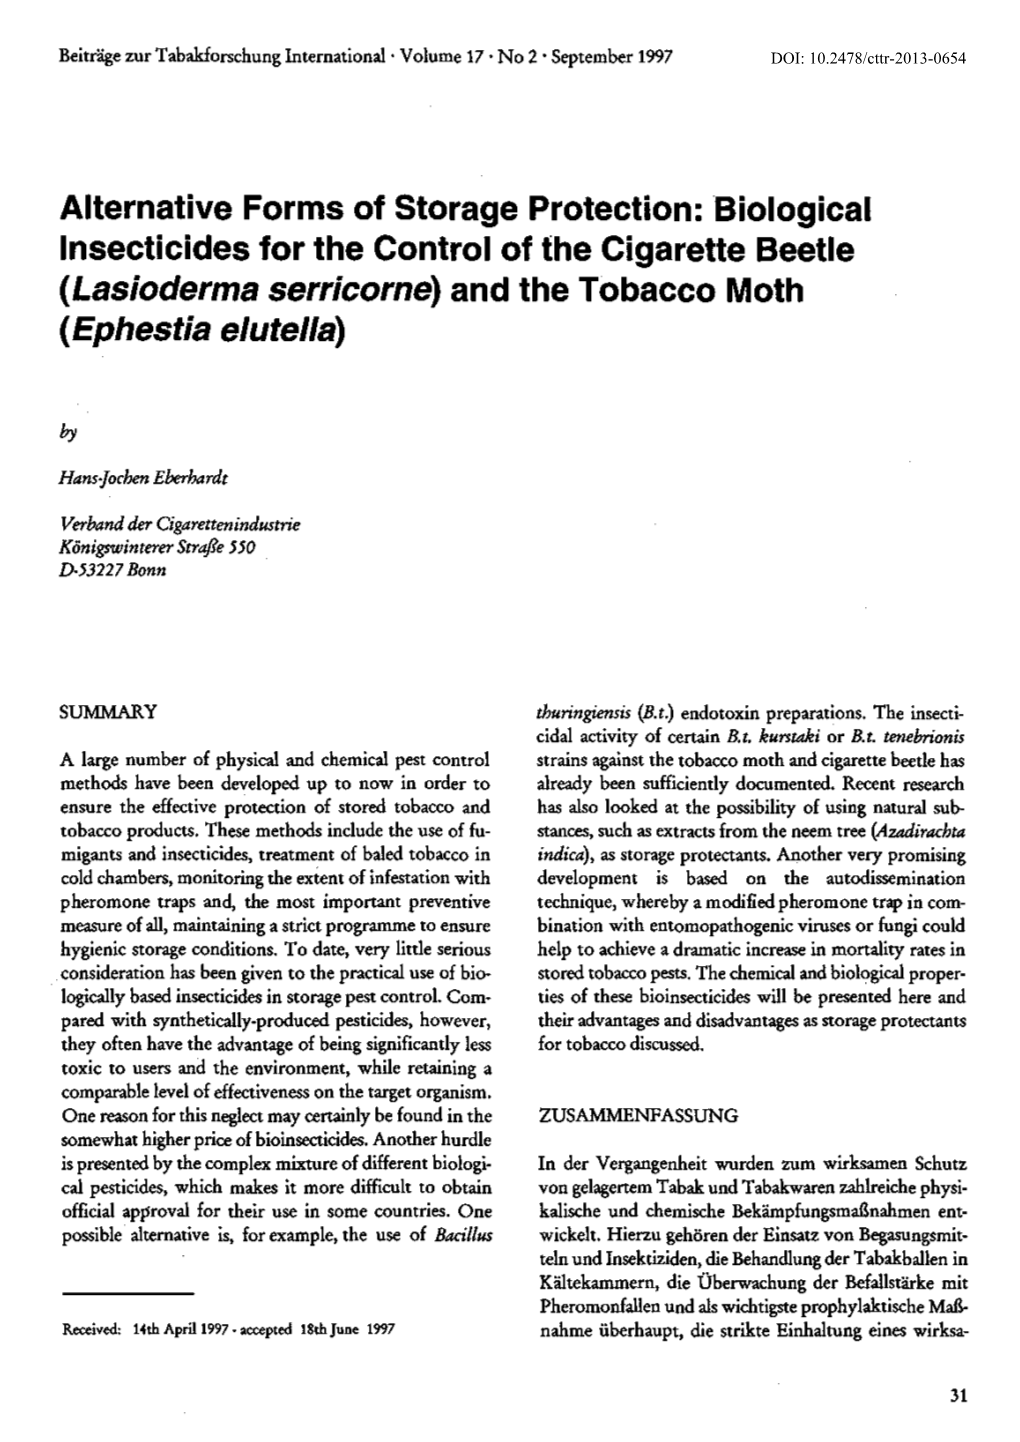 Biological Insecticides for the Control of the Cigarette Beetle (Lasioderma Serricorne) and the Tobacco Moth (Ephestia Elute/La)